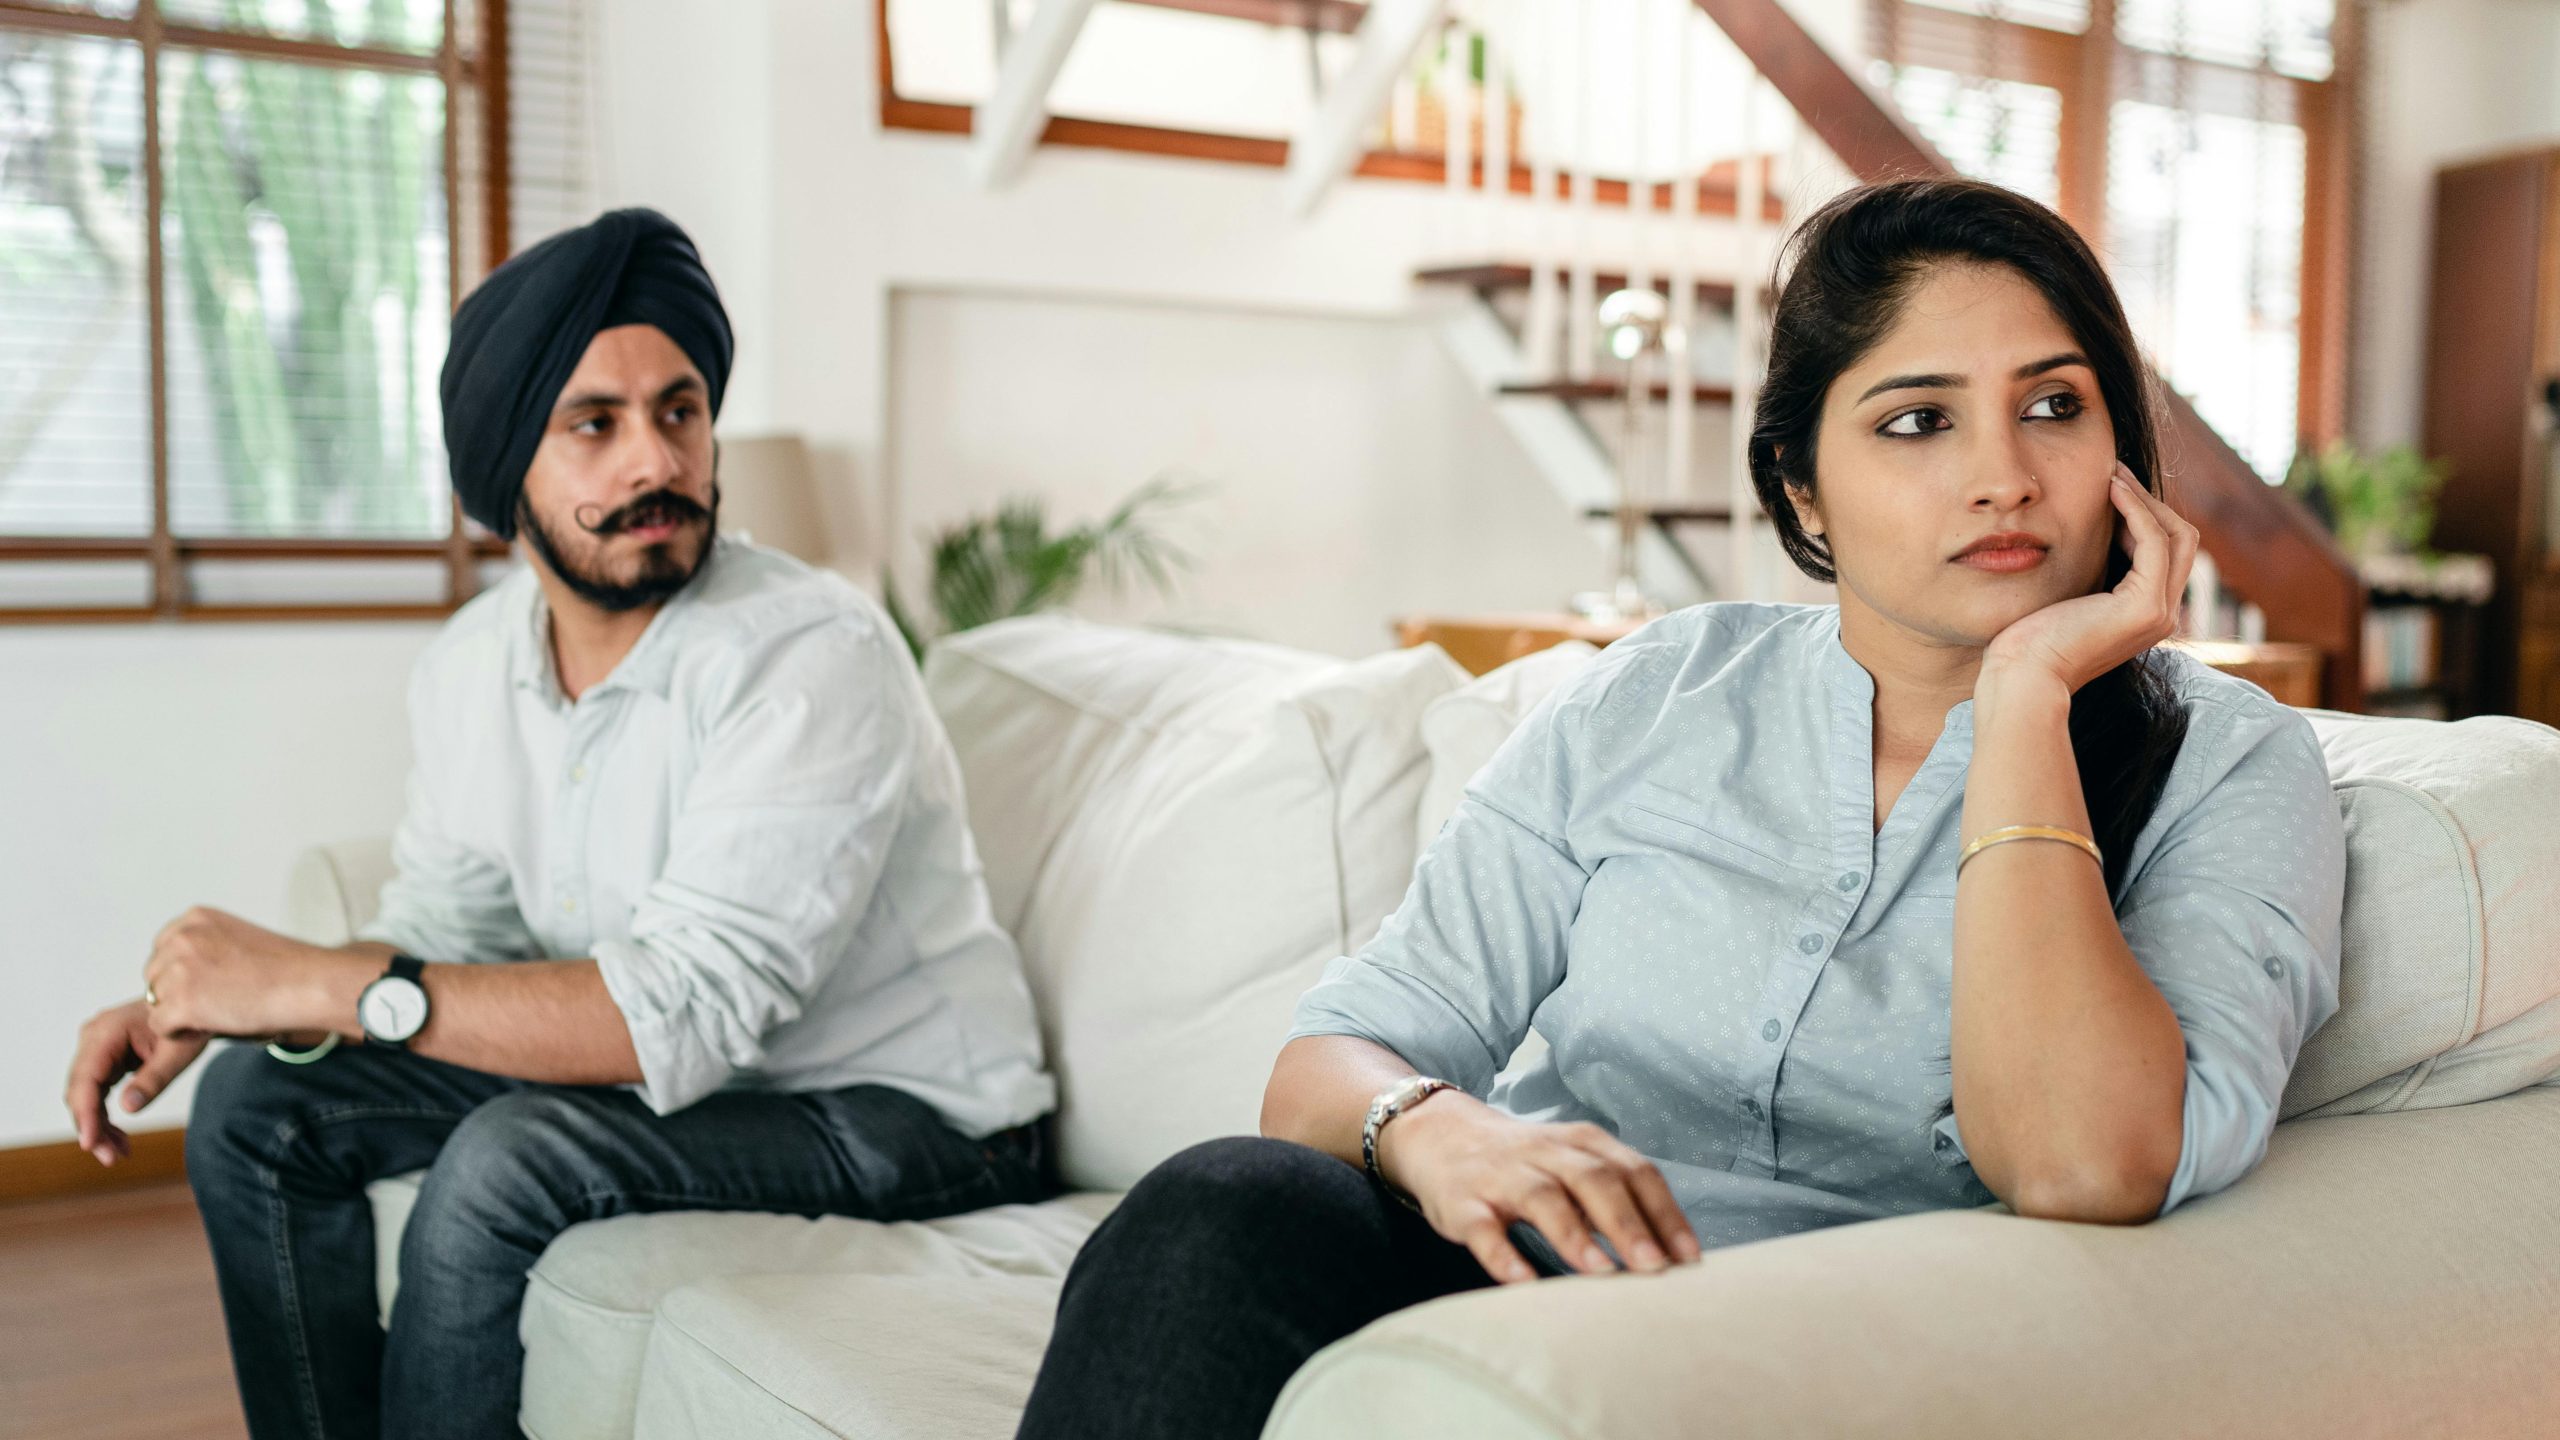 Upset young couple having argument while sitting on couch